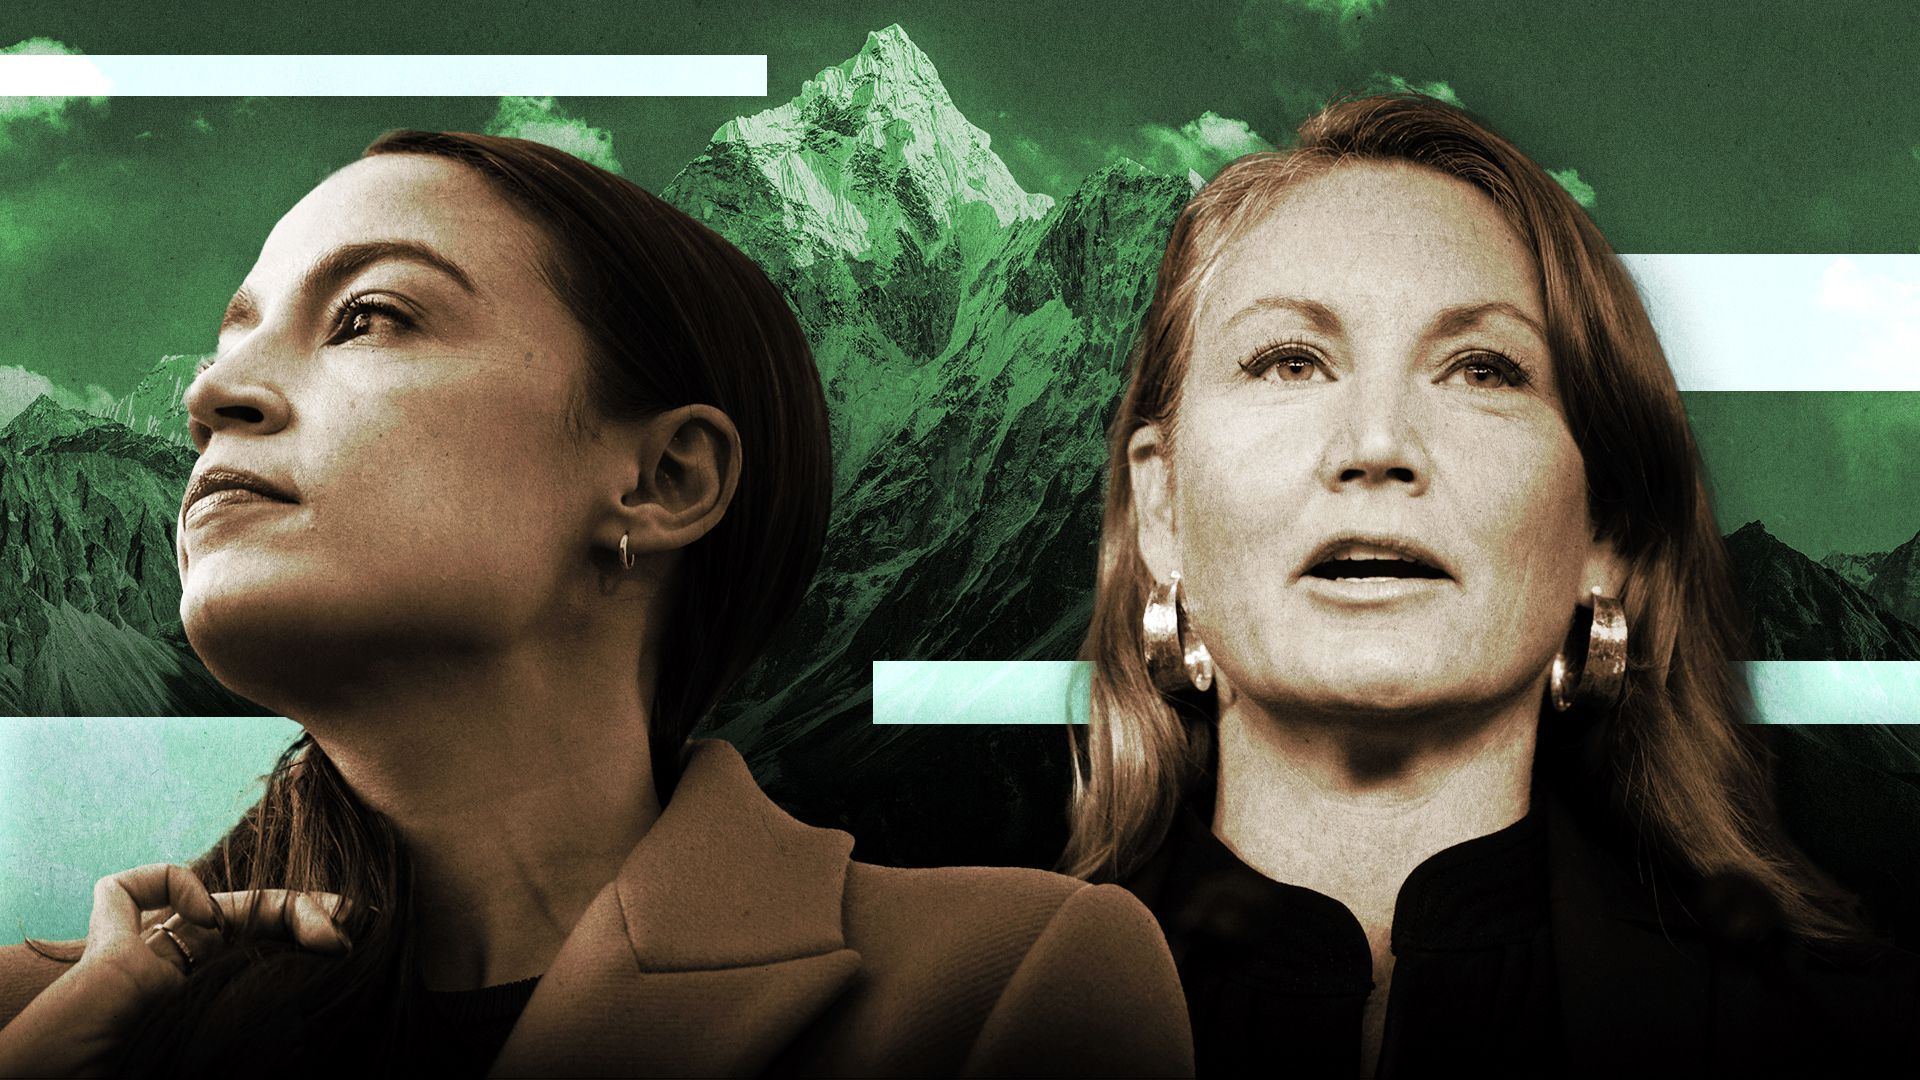 Photo illustration of Reps. Alexandria Ocasio-Cortez and Melanie Stansbury with a mountain in the background.